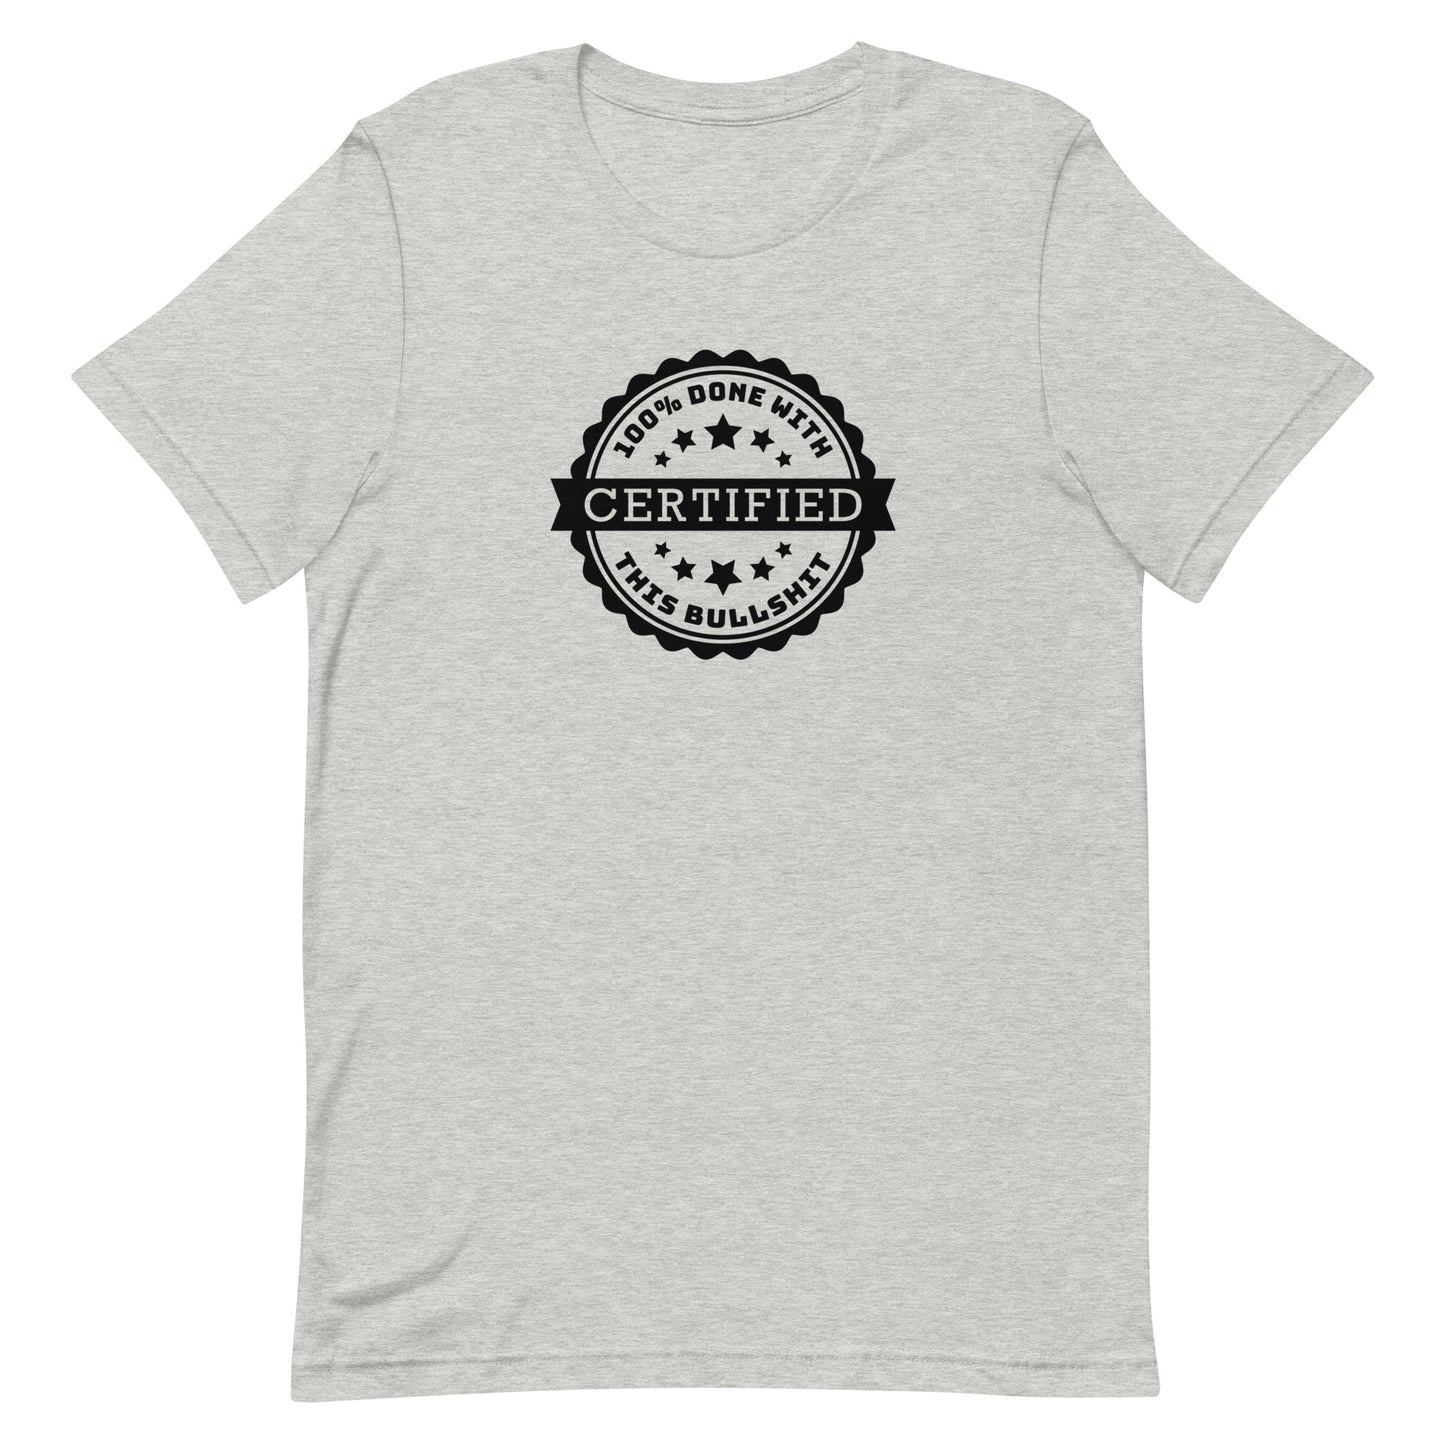 A grey crewneck t-shirt featuring an official-looking seal which reads "CERTIFIED 100% done with this bullshit"